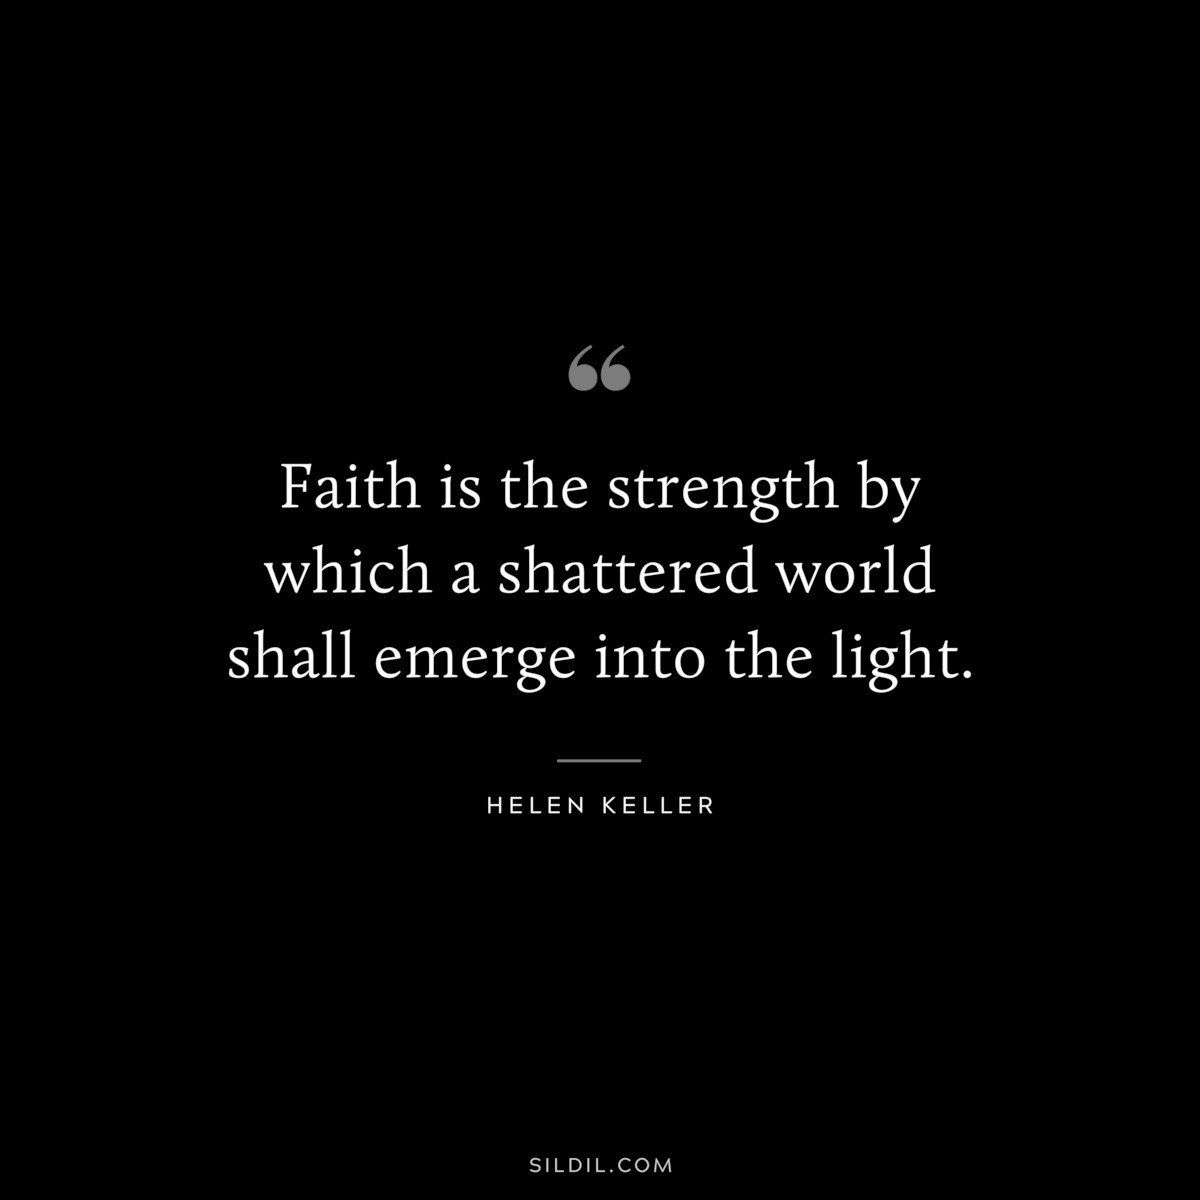 Faith is the strength by which a shattered world shall emerge into the light. ― Helen Keller